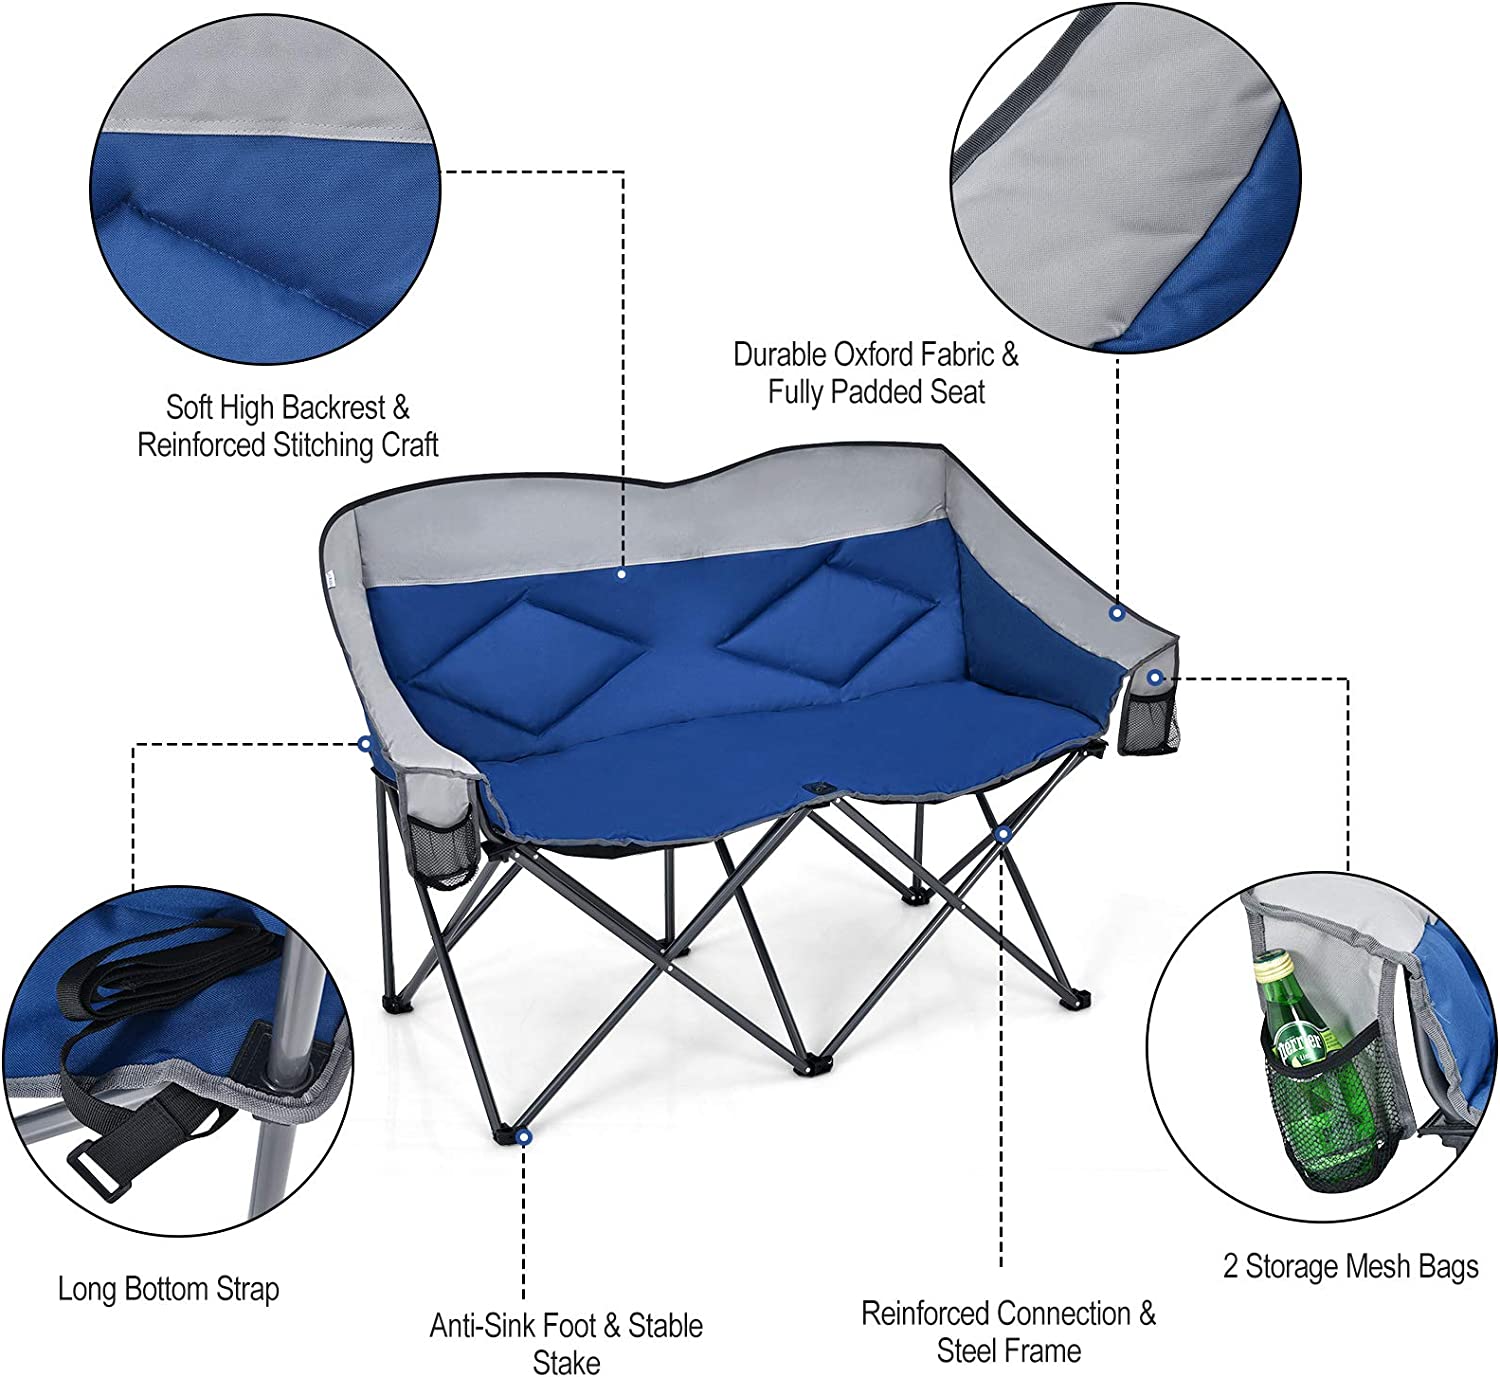 Outdoor Folding Camping Chair with Back Support Storage Bag